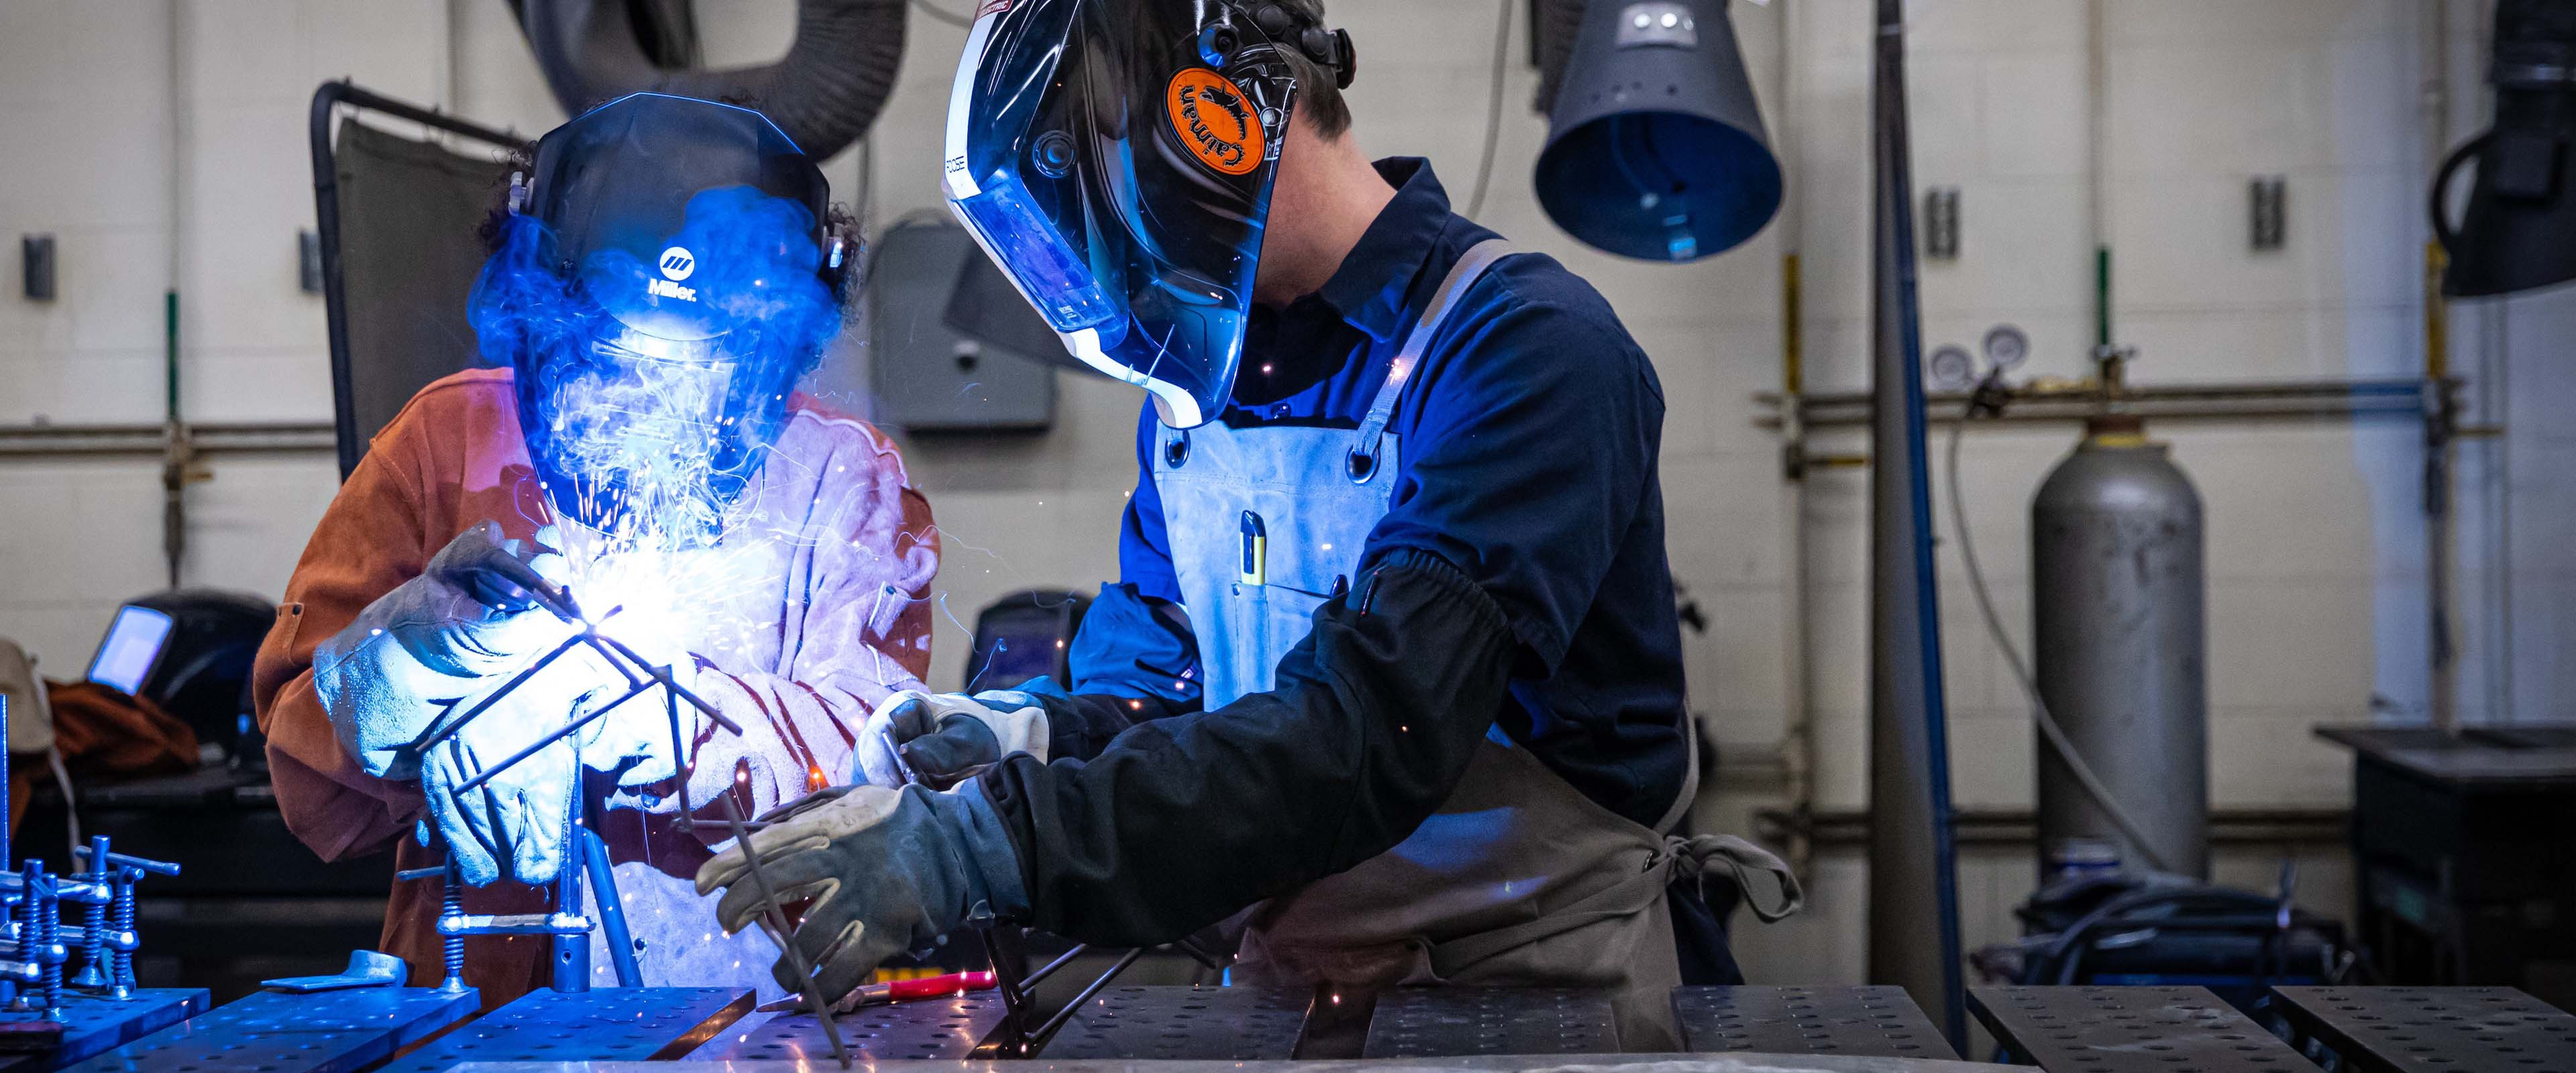 A student and teacher welding something in an art studio.